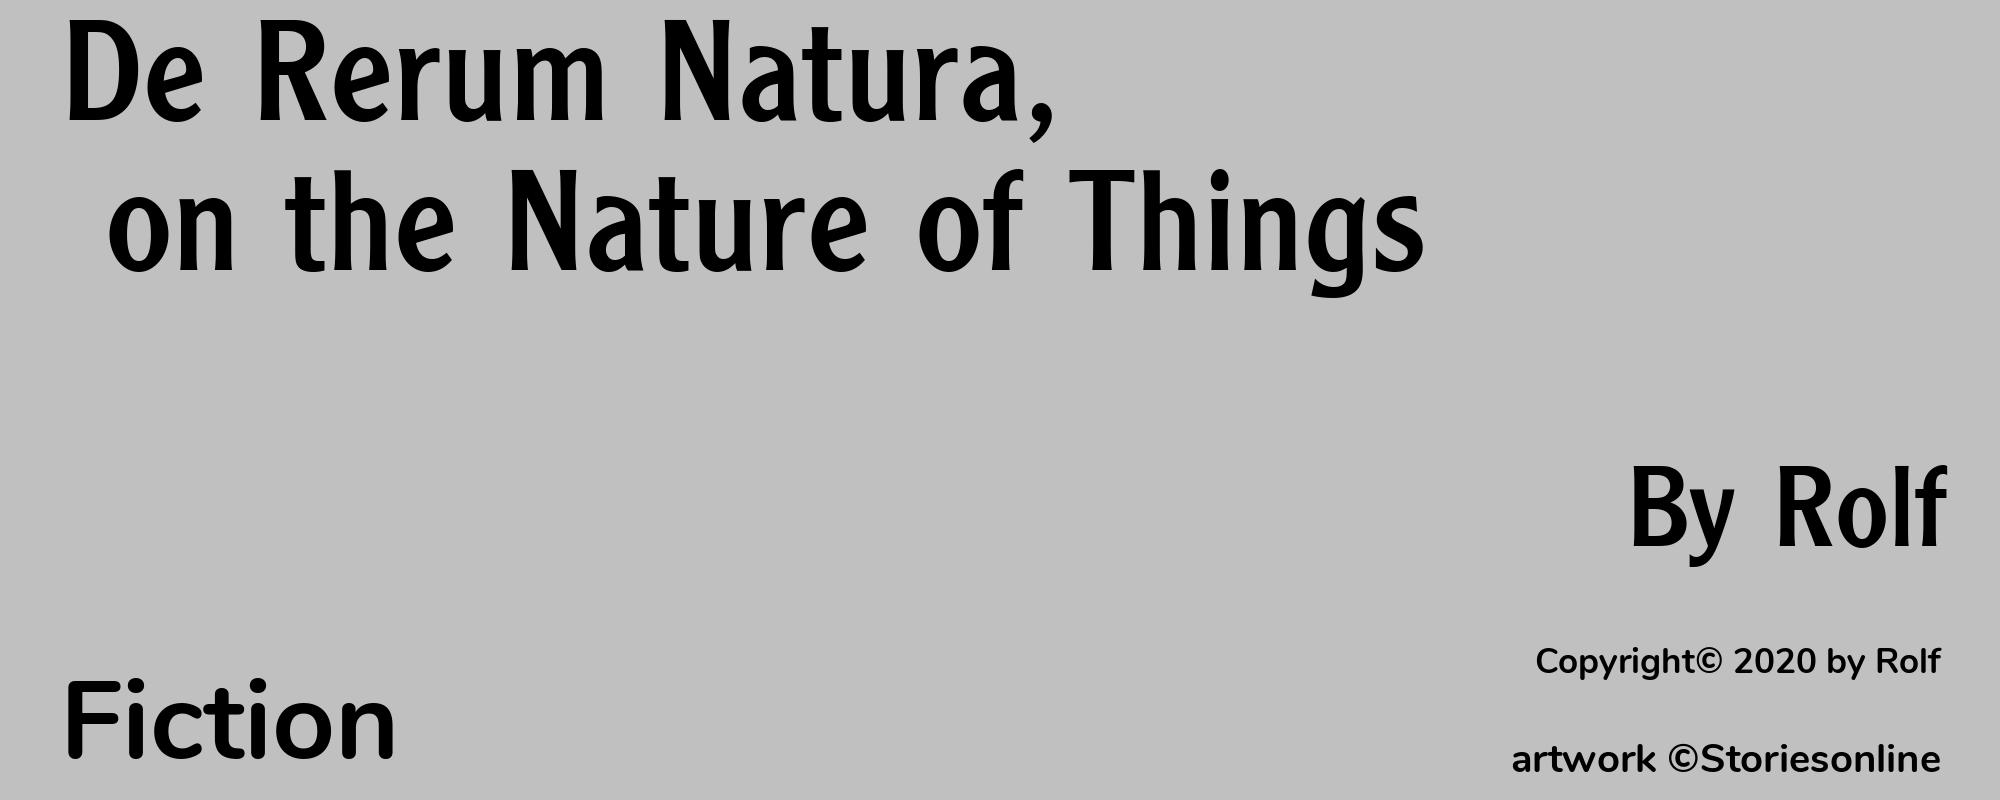 De Rerum Natura, on the Nature of Things - Cover